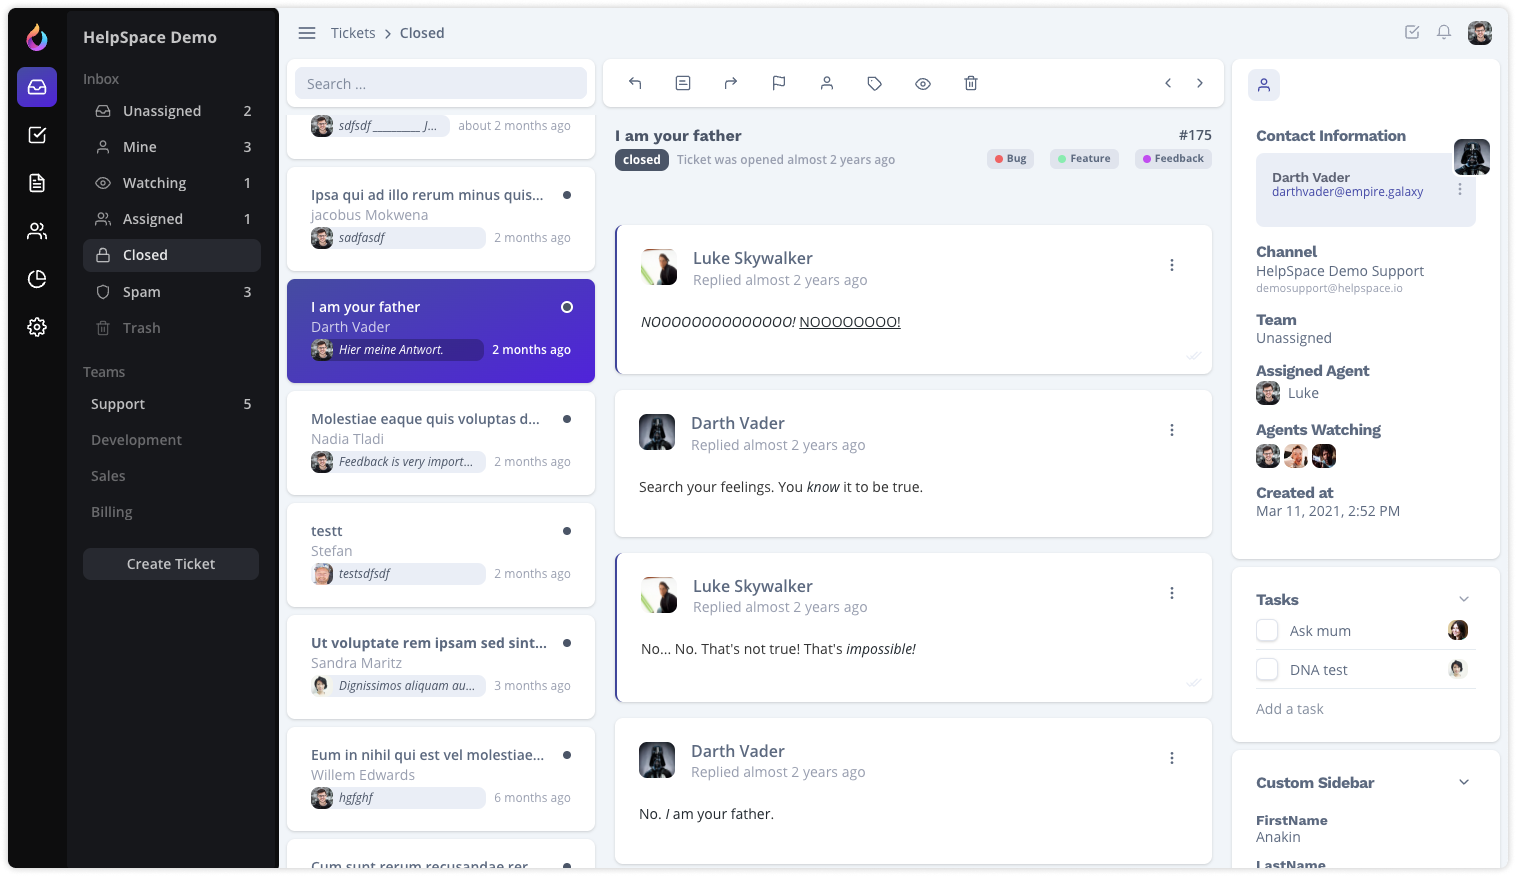 HelpSpace Tickets: customer inquiries that are efficiently and traceably processed by the team, either by writing responses using templates or assigning them directly to team members.